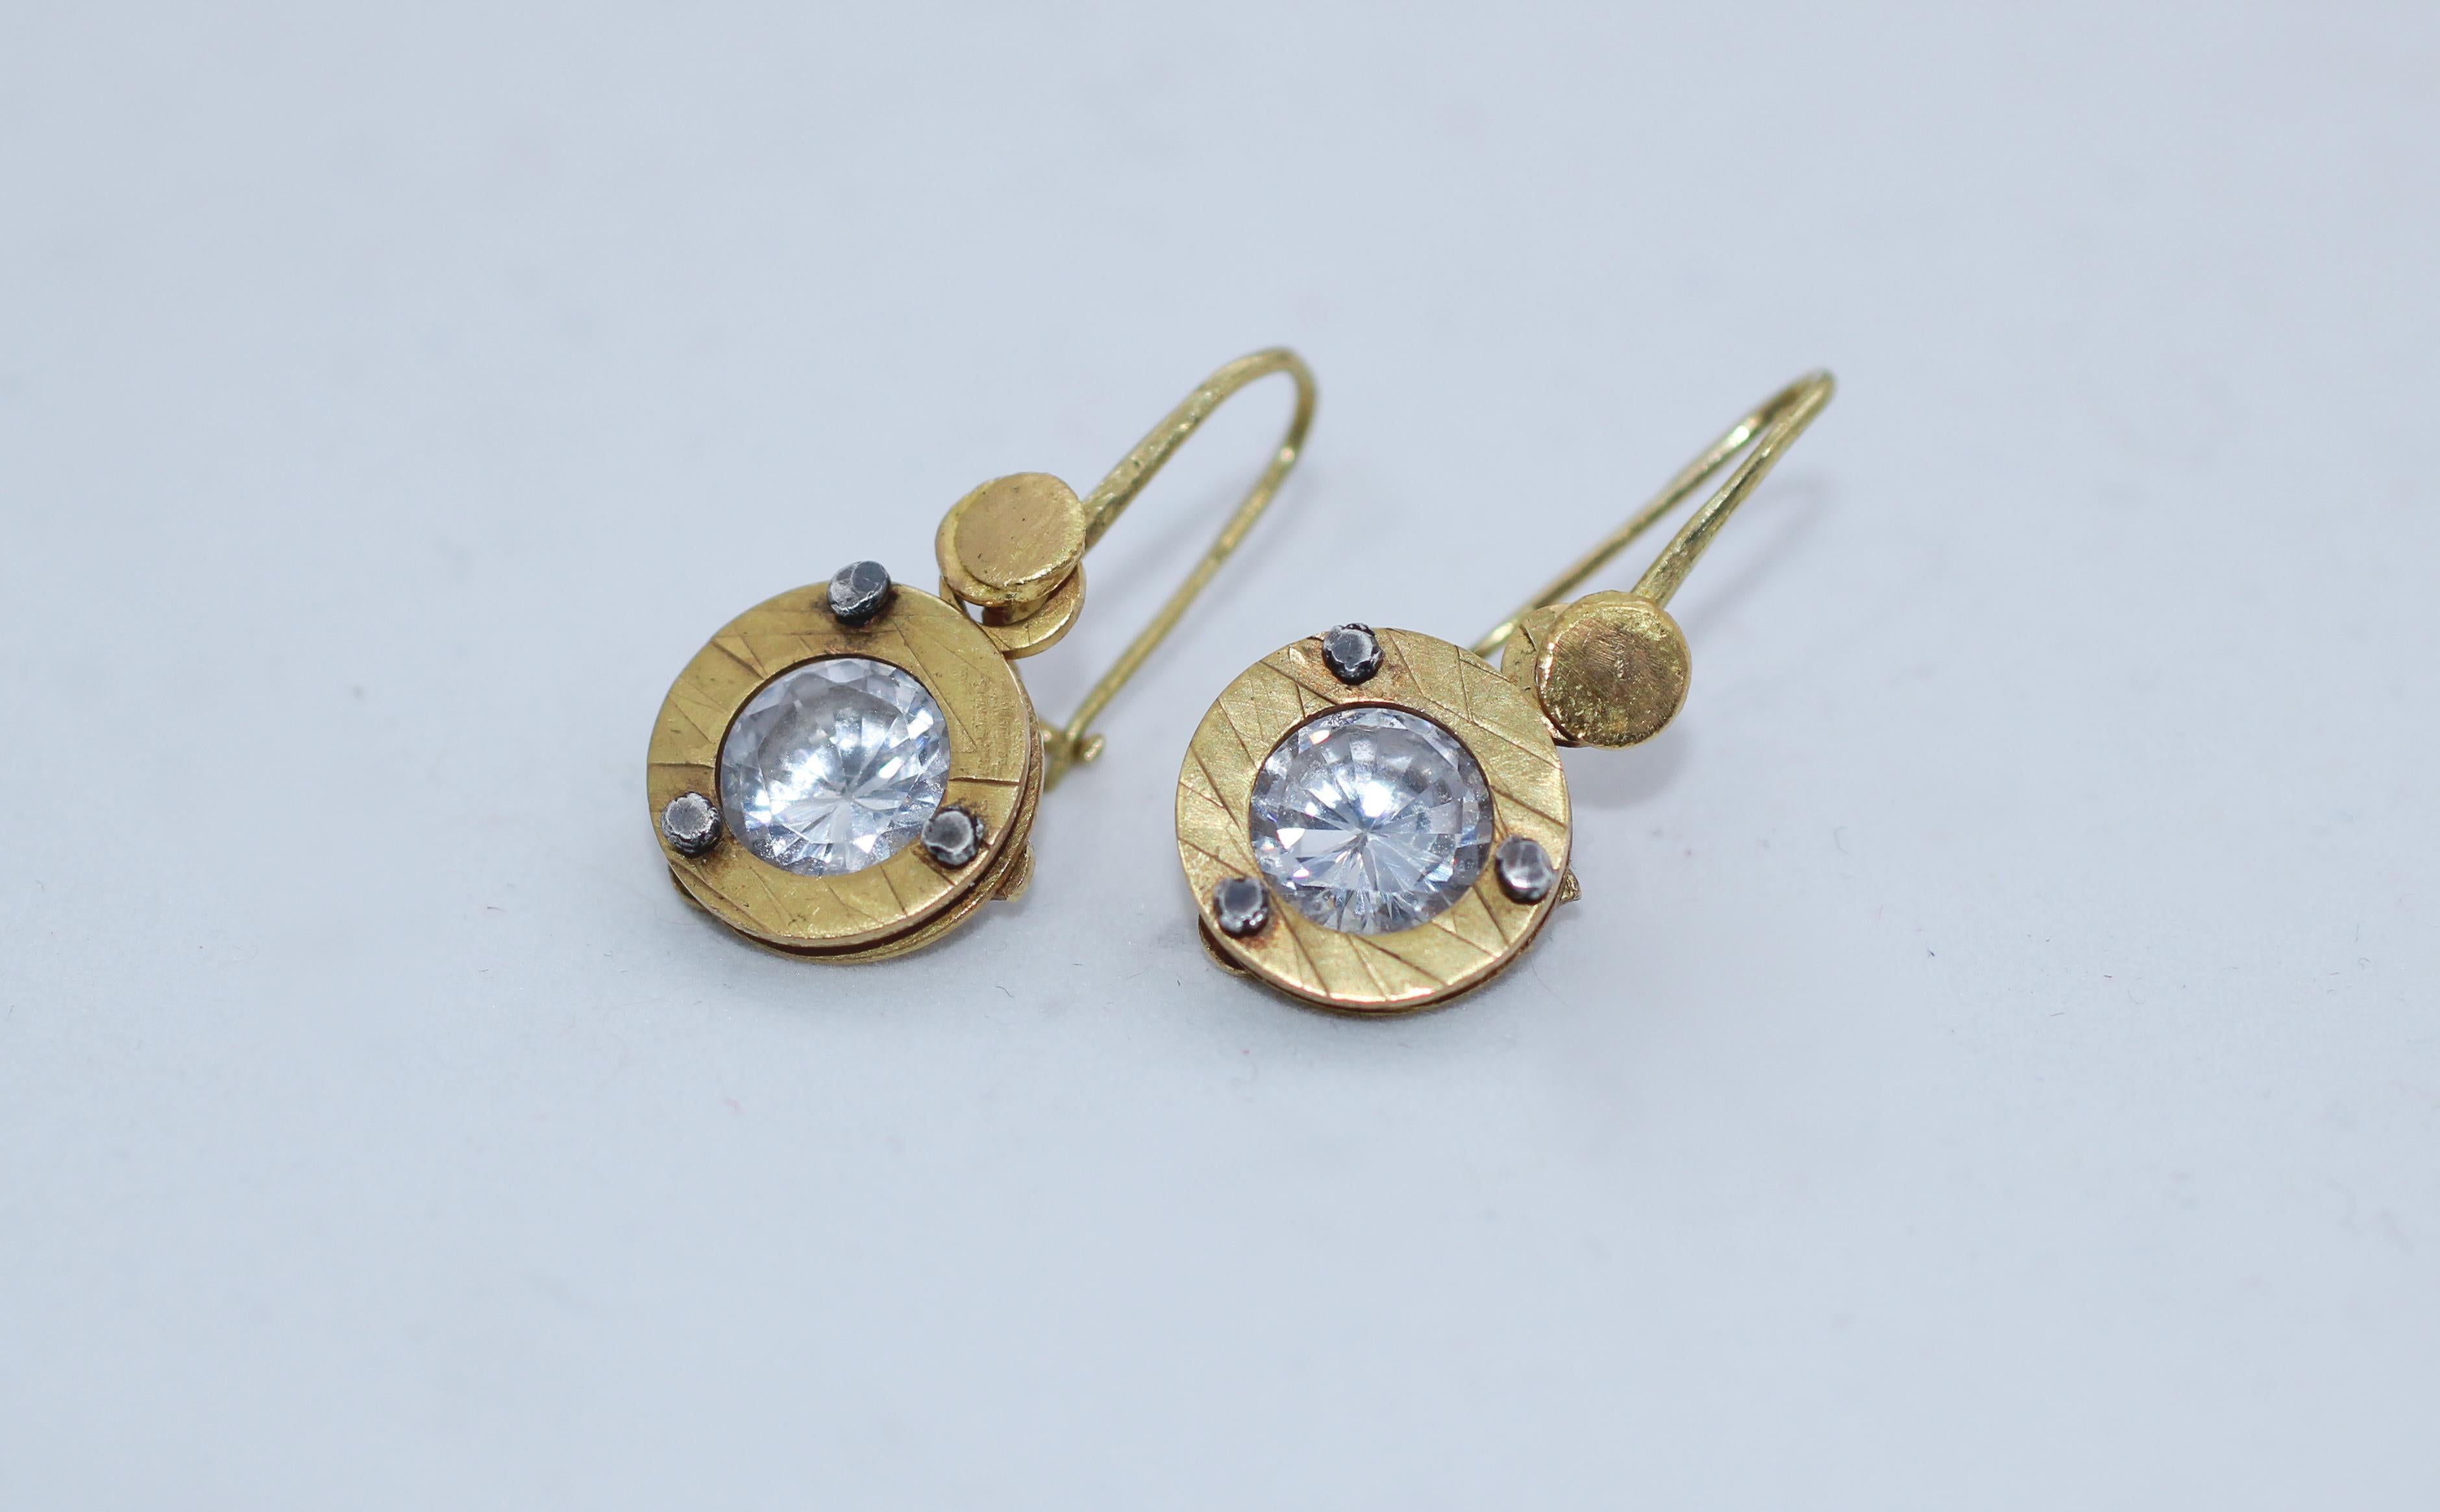 Brilliant Dangle Drop Earrings. Brilliant cut white natural Zircons are set in textured 21K gold. This simple design brings together many elements - industry, constructivism, and manual craftsmanship. The surface is textured to compliment the